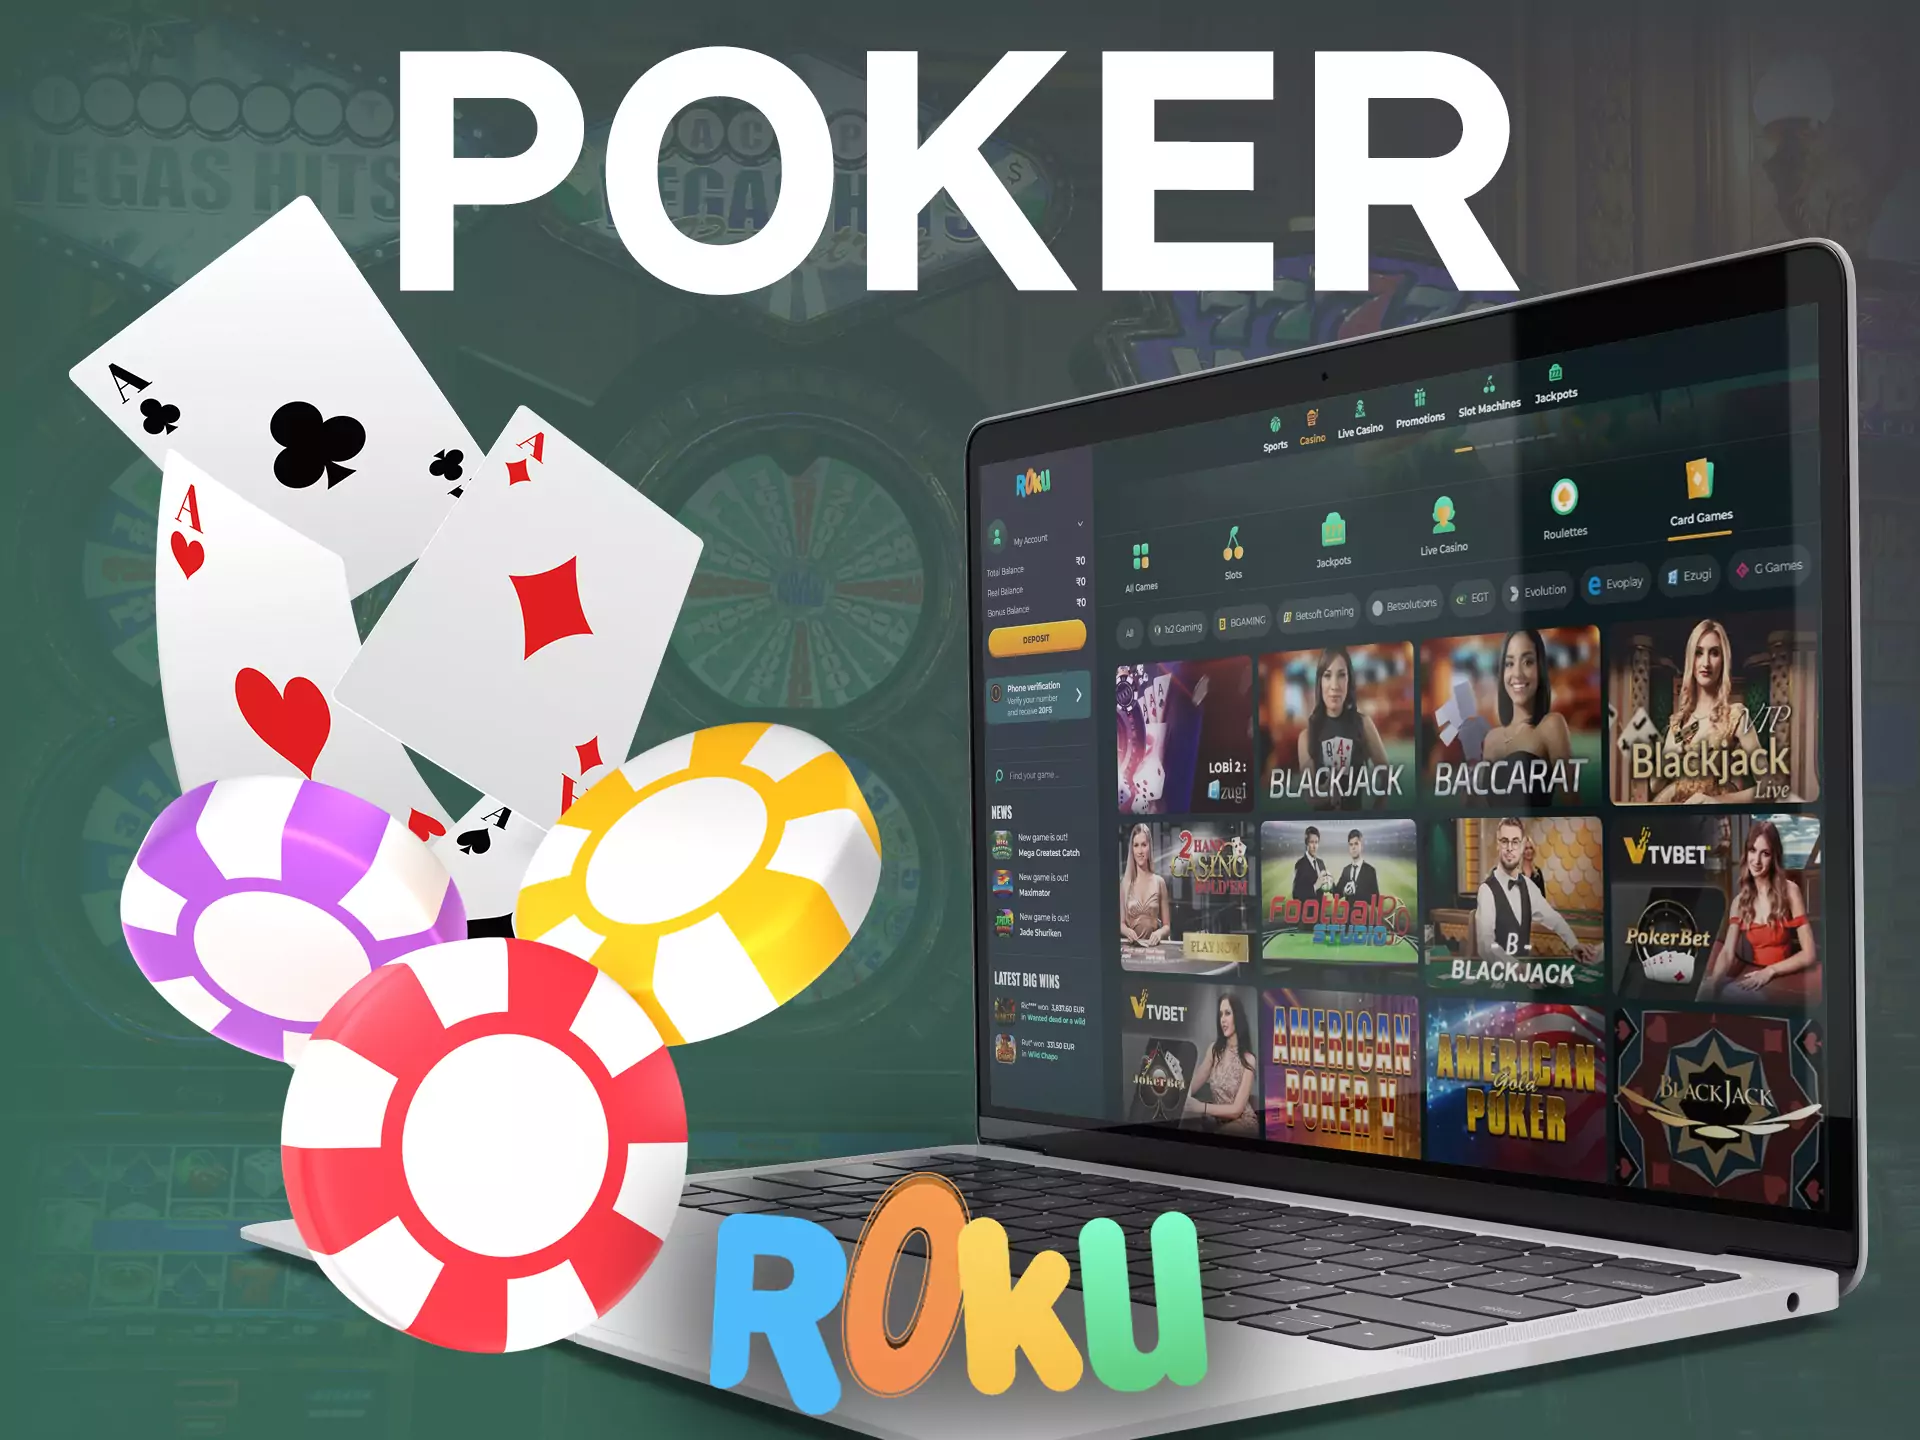 Online poker is also presented on the Rokubet website and in the app.